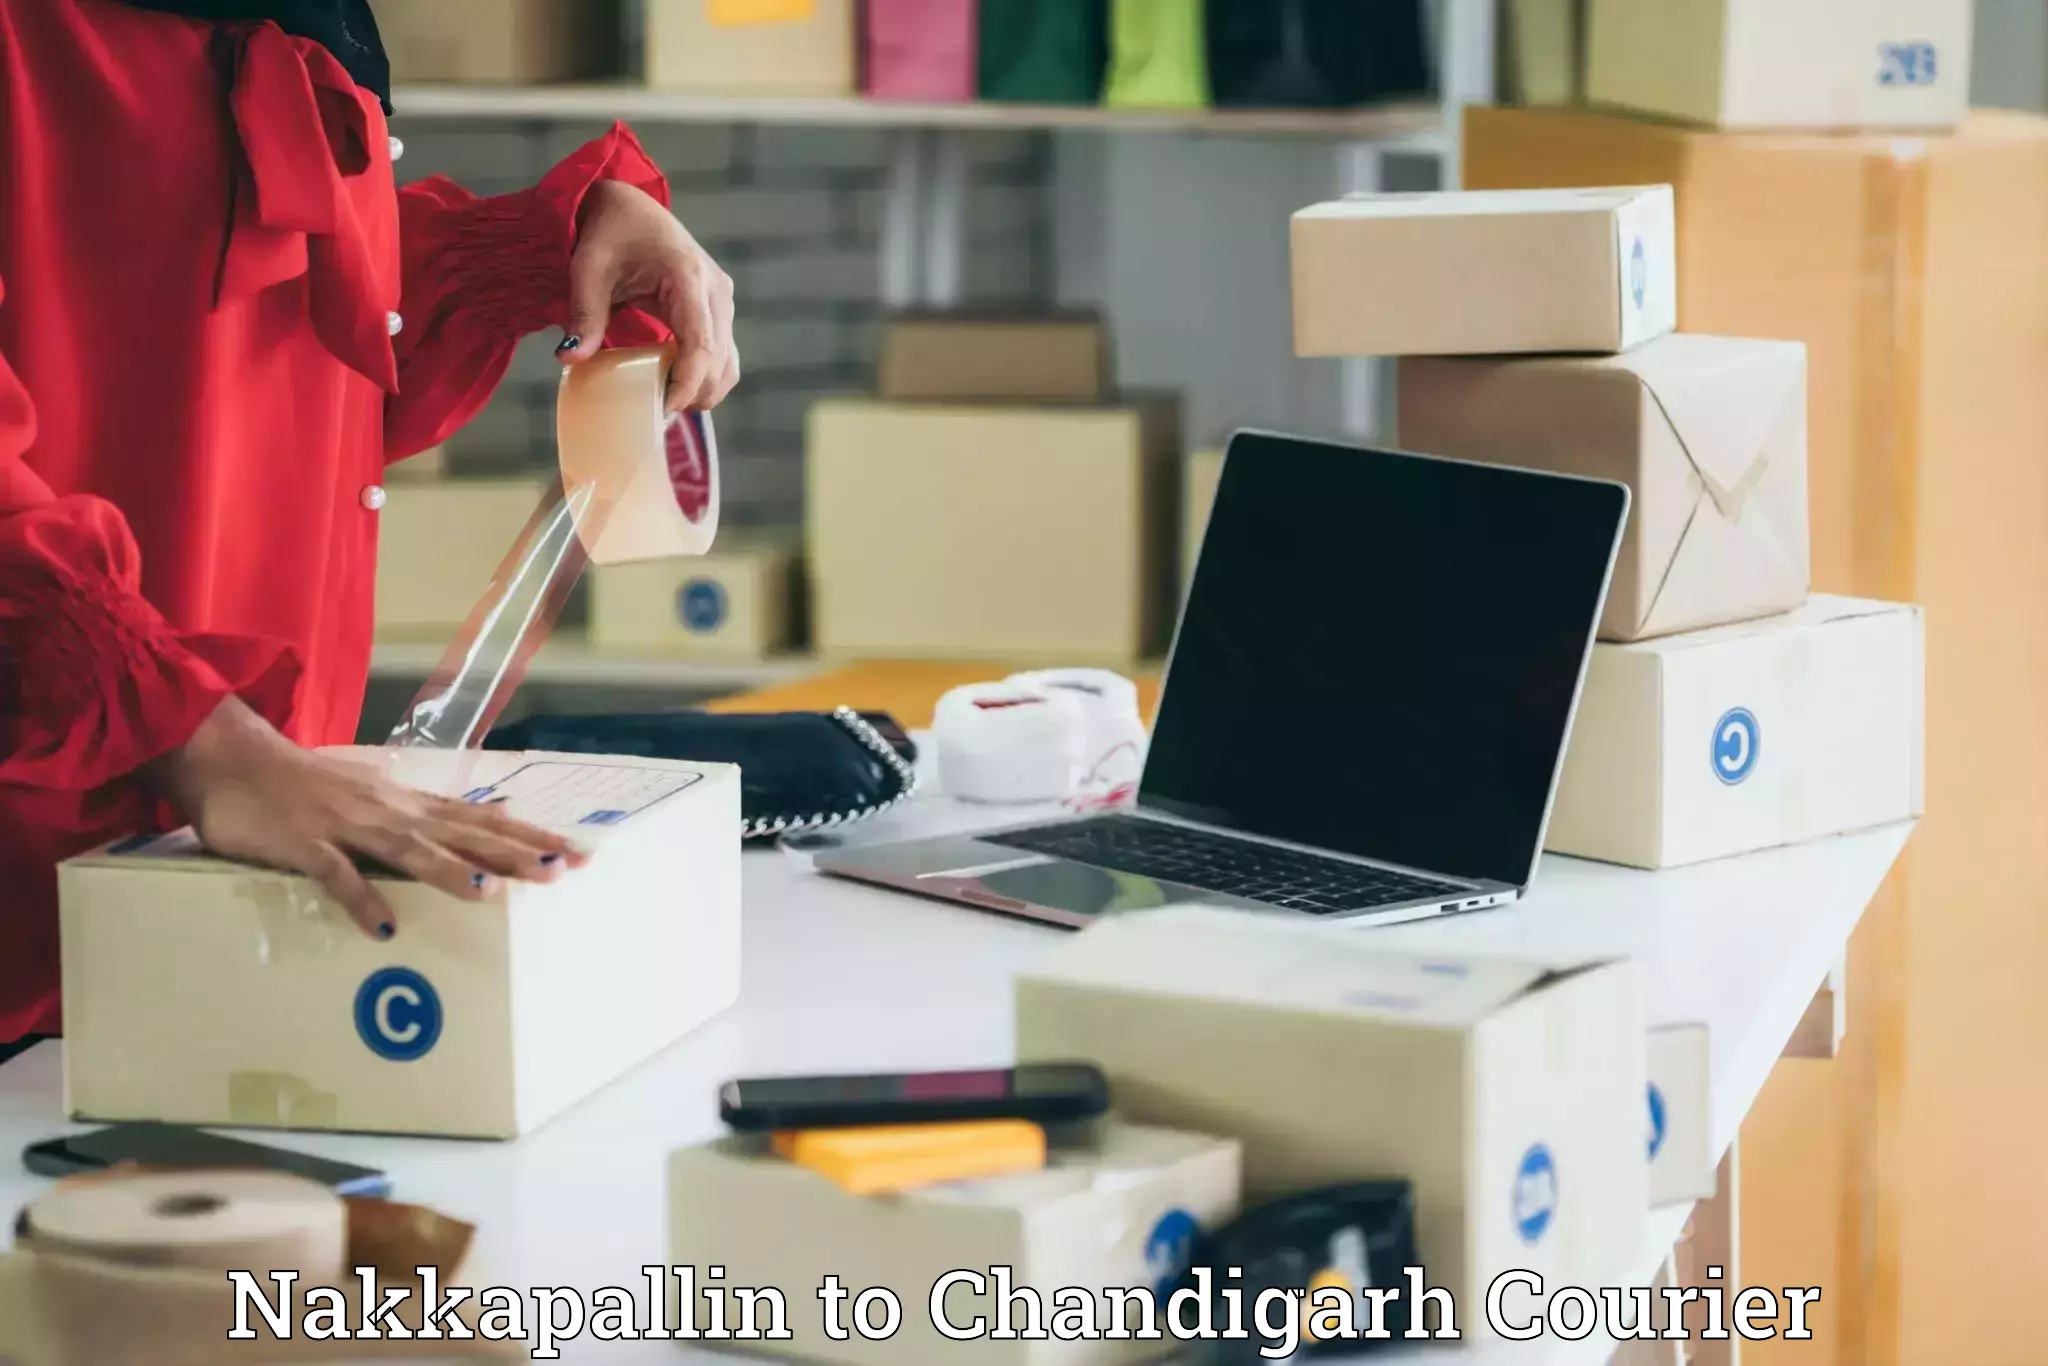 Nationwide delivery network Nakkapallin to Chandigarh